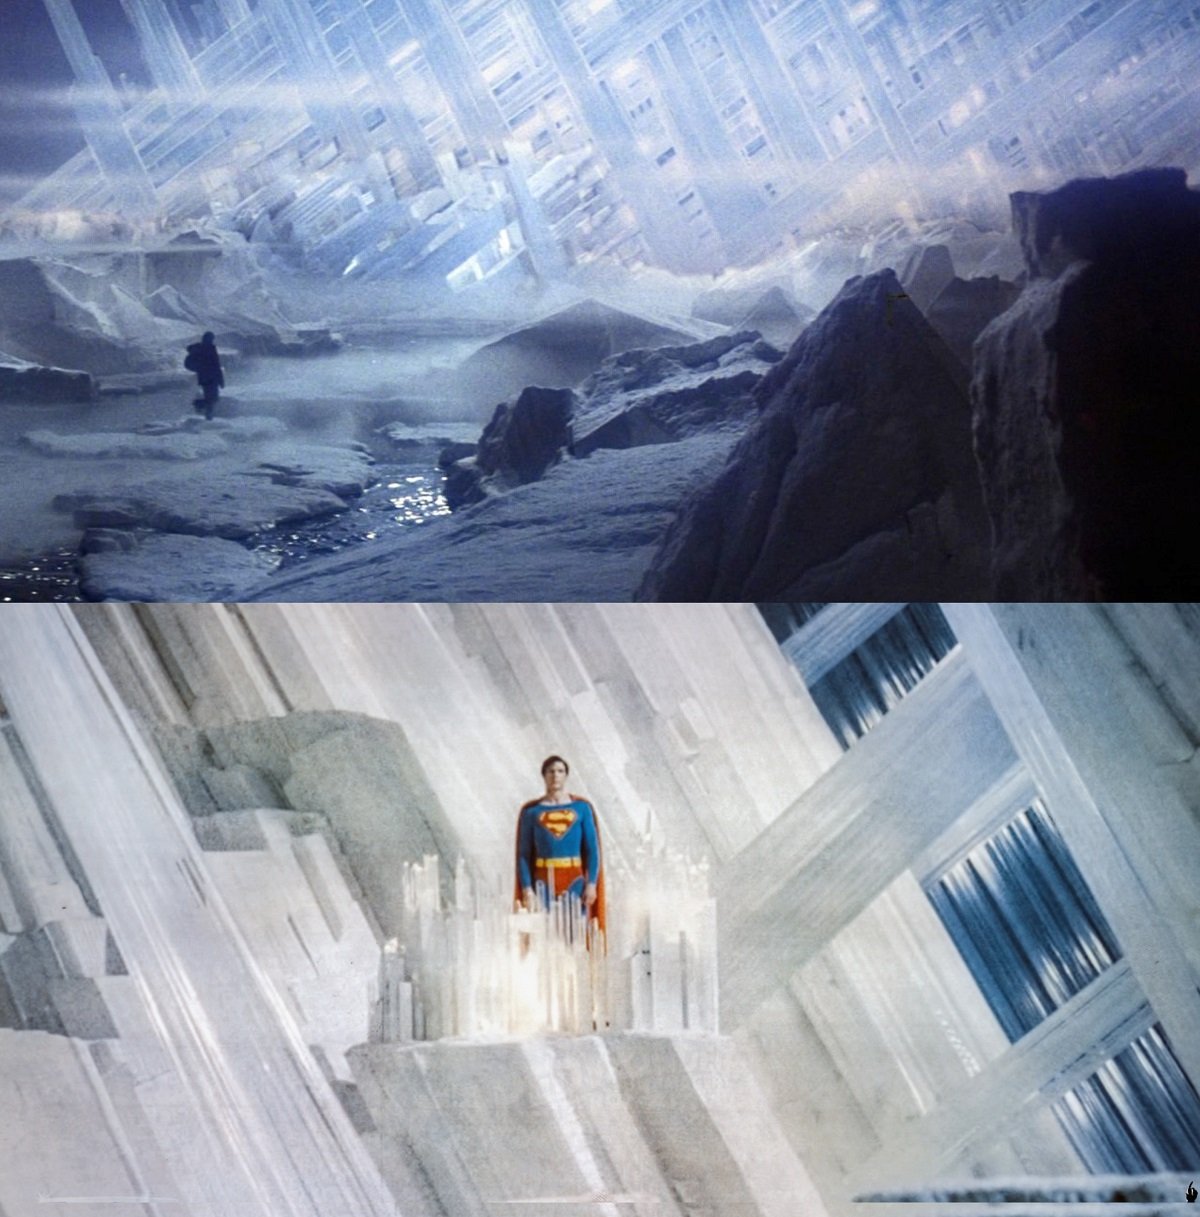 Fortress-of-Solitude-1978.jpg